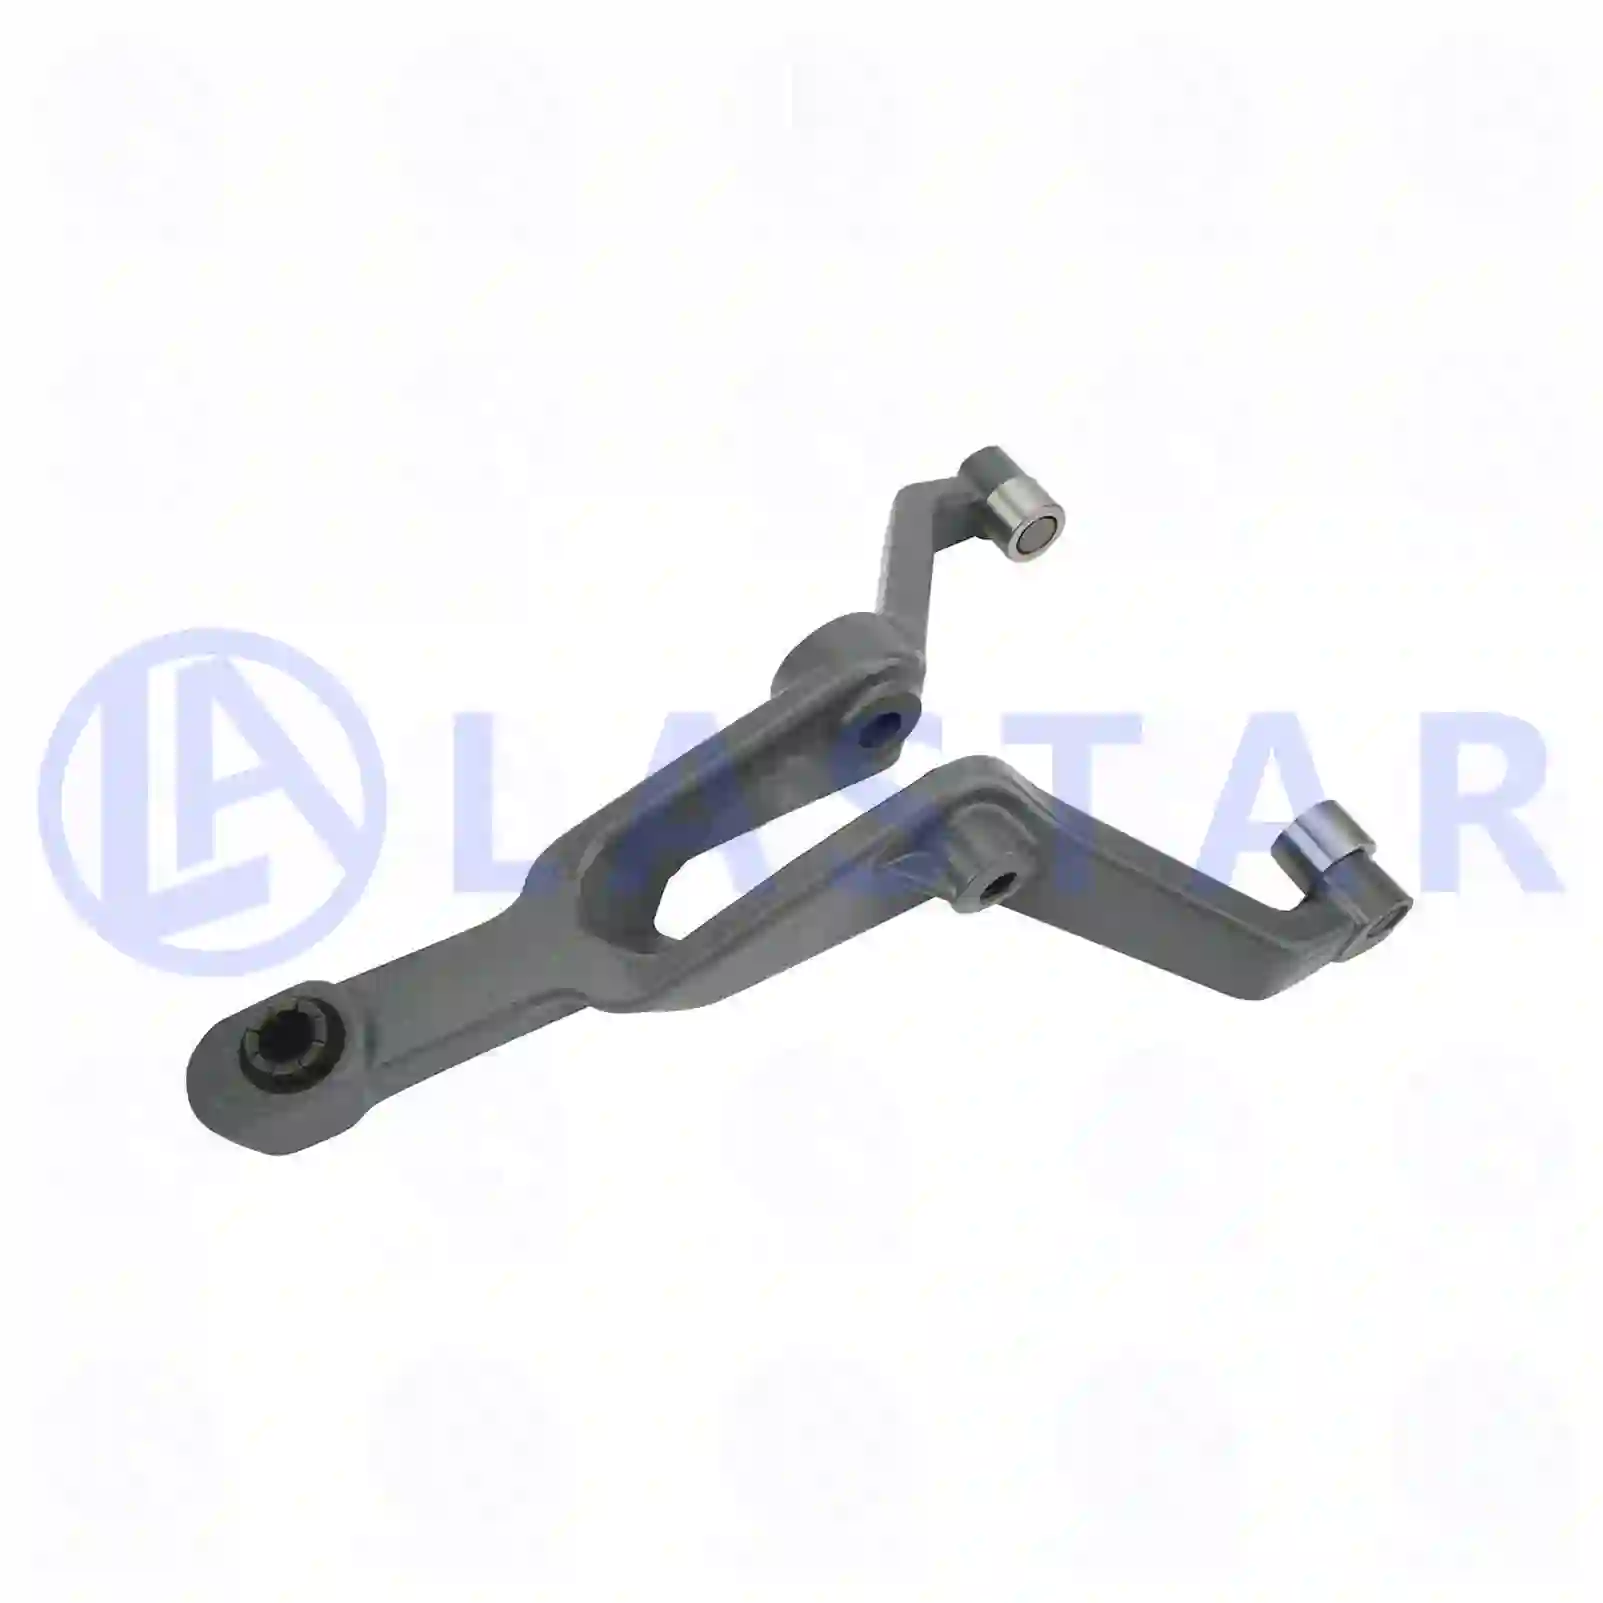 Release fork, 77722294, 3191966, 8171176, ZG30359-0008 ||  77722294 Lastar Spare Part | Truck Spare Parts, Auotomotive Spare Parts Release fork, 77722294, 3191966, 8171176, ZG30359-0008 ||  77722294 Lastar Spare Part | Truck Spare Parts, Auotomotive Spare Parts